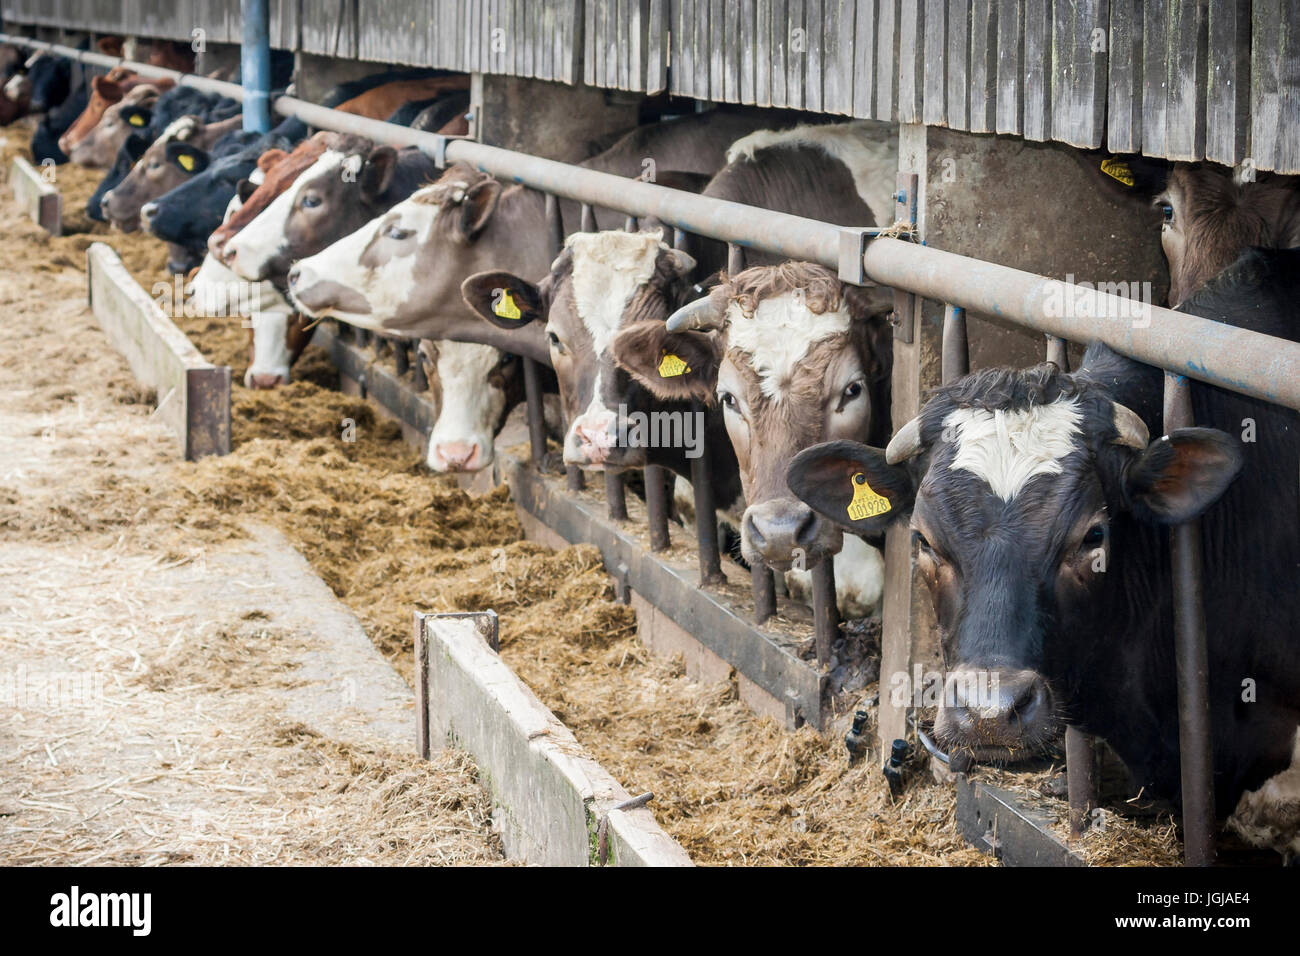 Intensively farmed cattle in a barn with feeding trough. Stock Photo